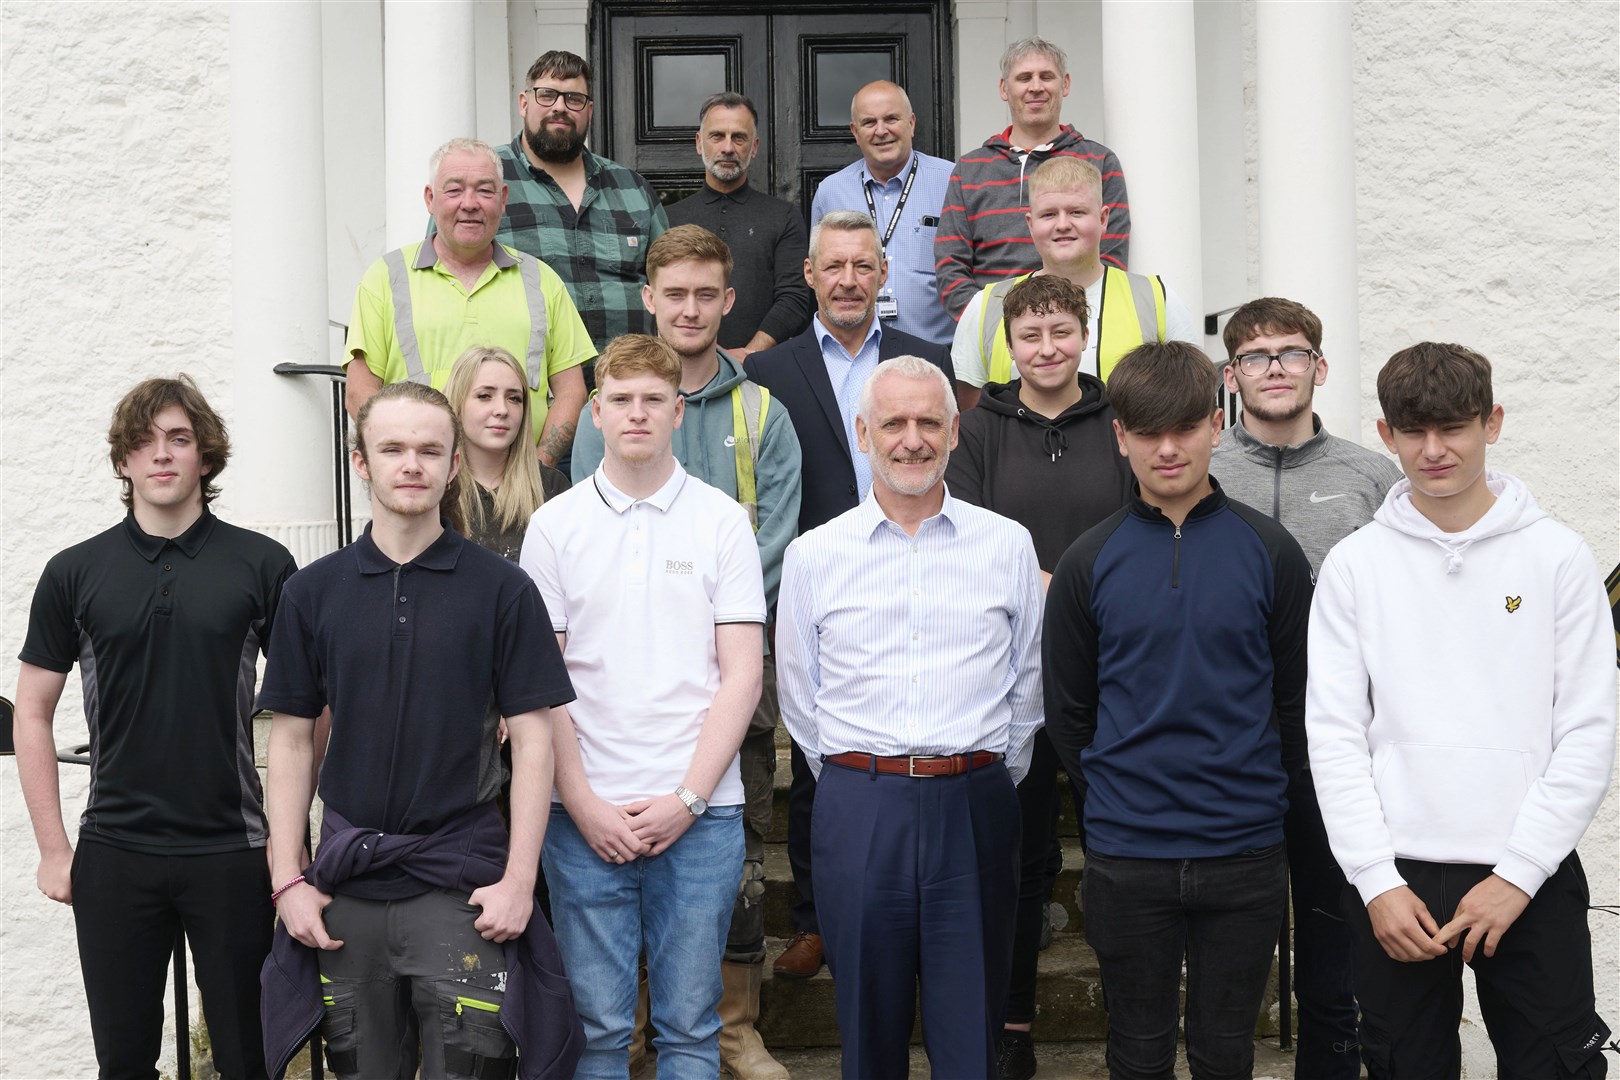 The new apprentices are welcomed to Tulloch Homes.